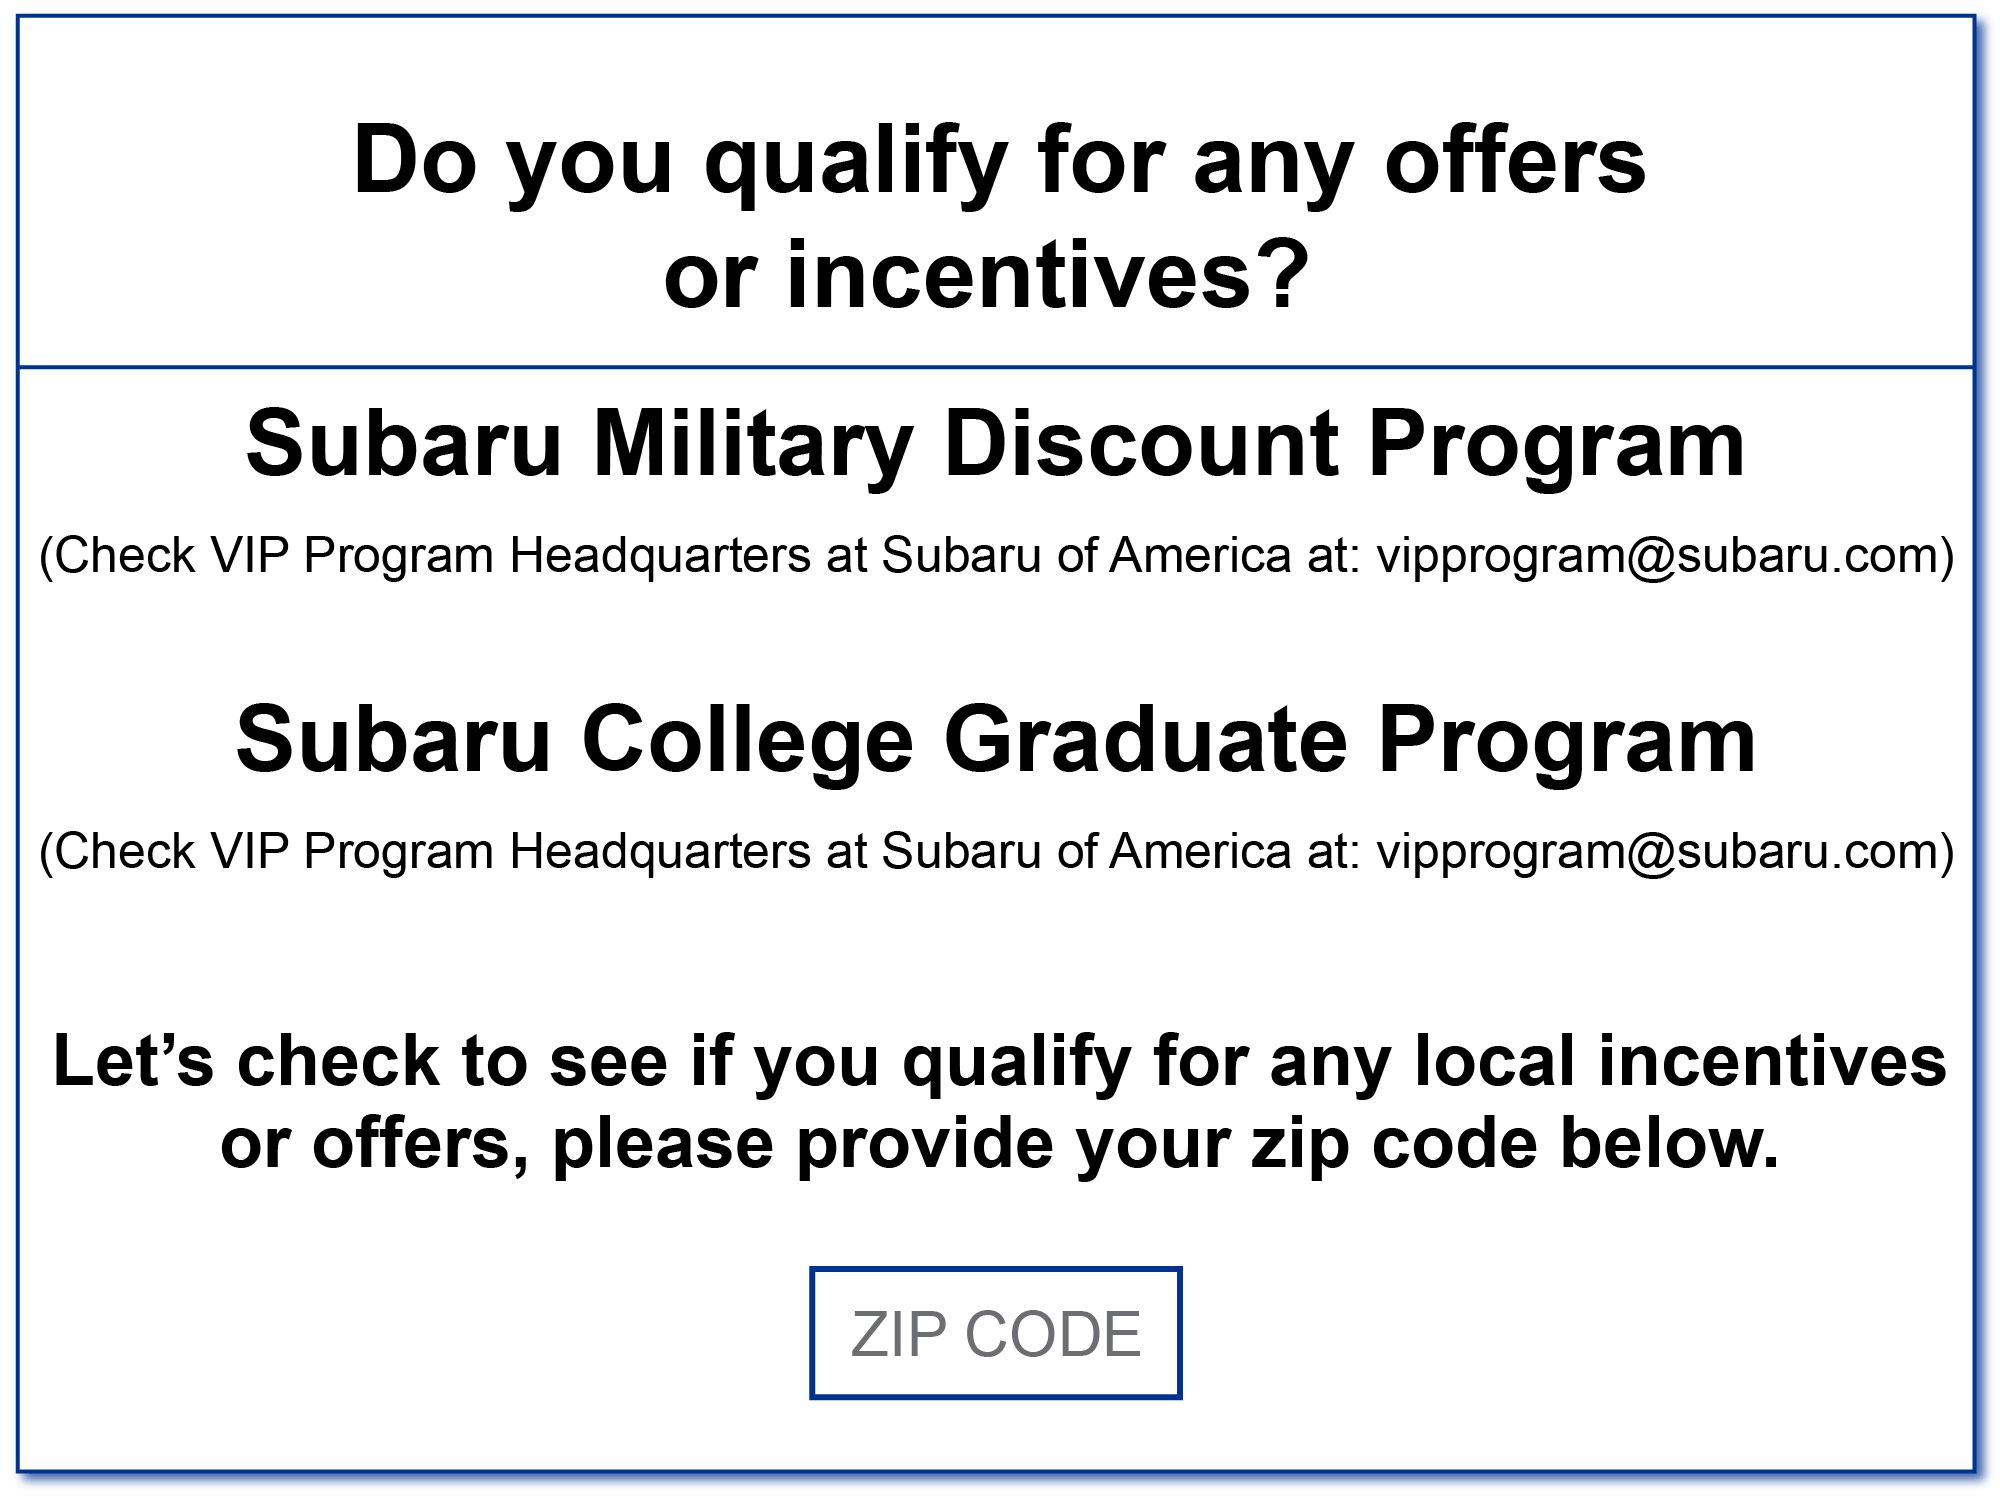 Offers and Incentives